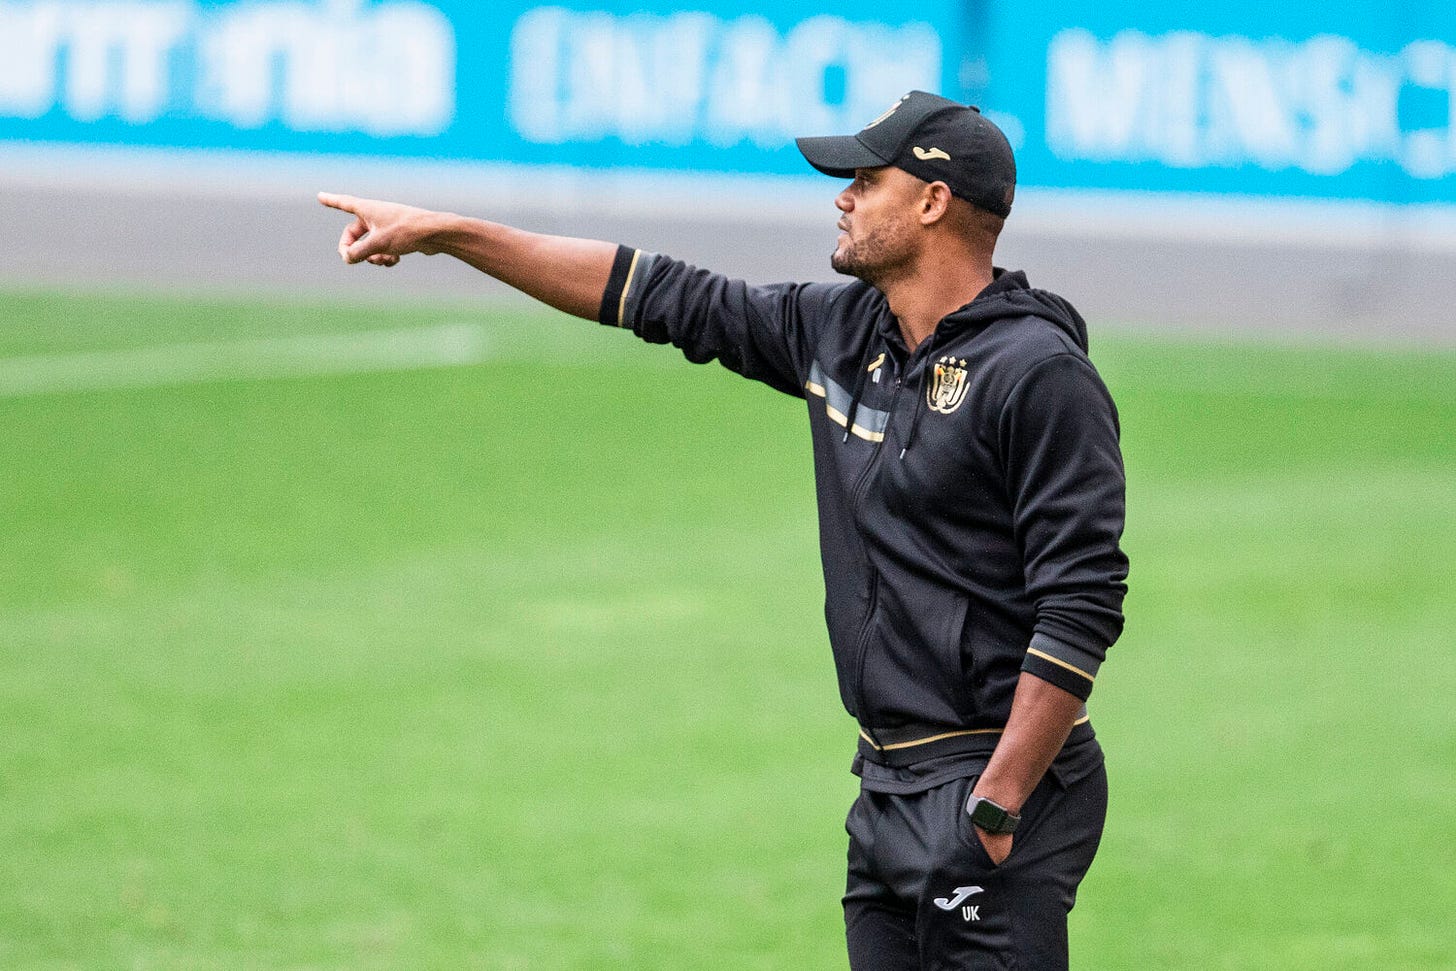 Vincent Kompany returned to his native Belgium after twelve years in England to take up a top-level coaching role with RSC Anderlecht